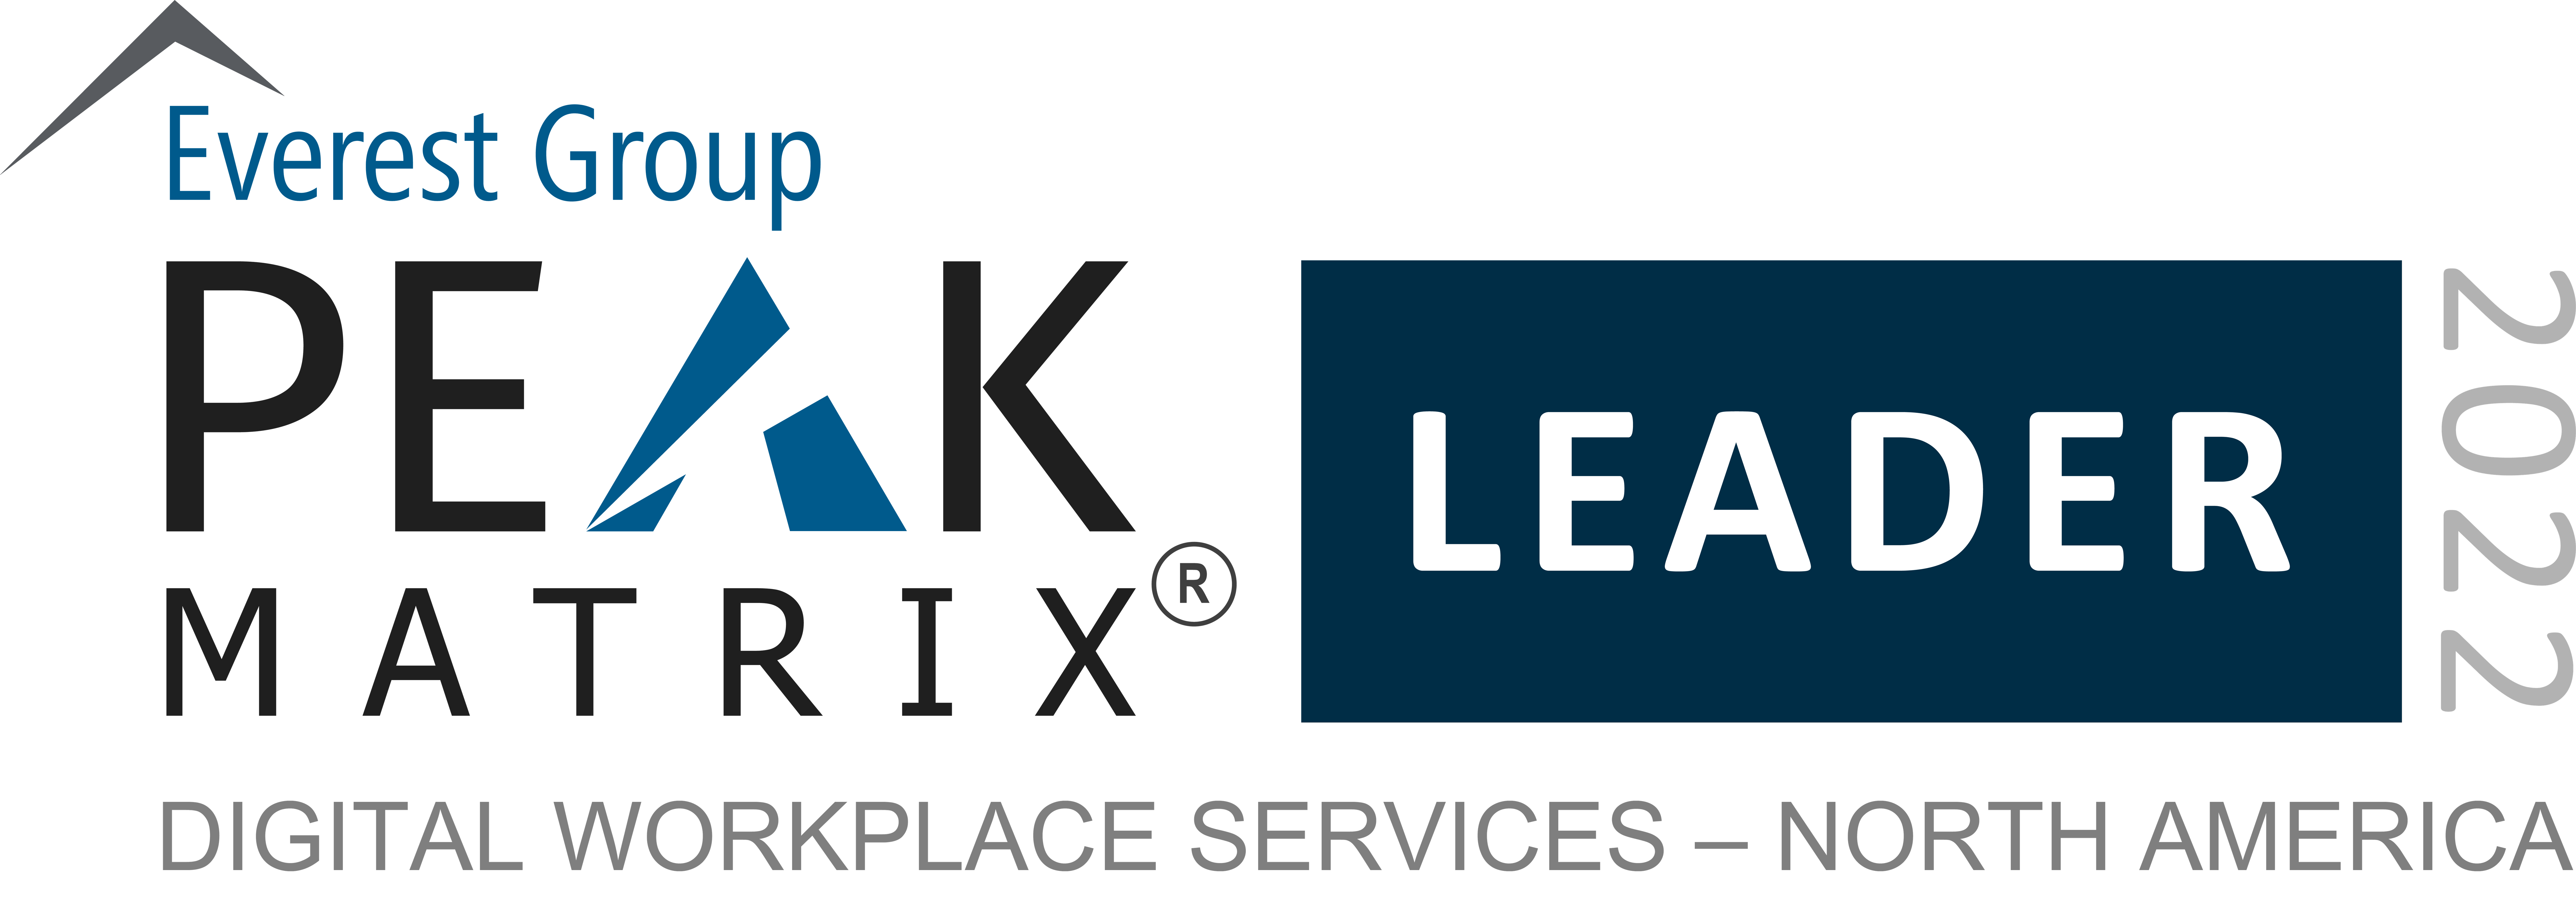 HCLTech named a Leader in Everest Group PEAK Matrix® for Digital Workplace Services Provider 2022 – North America